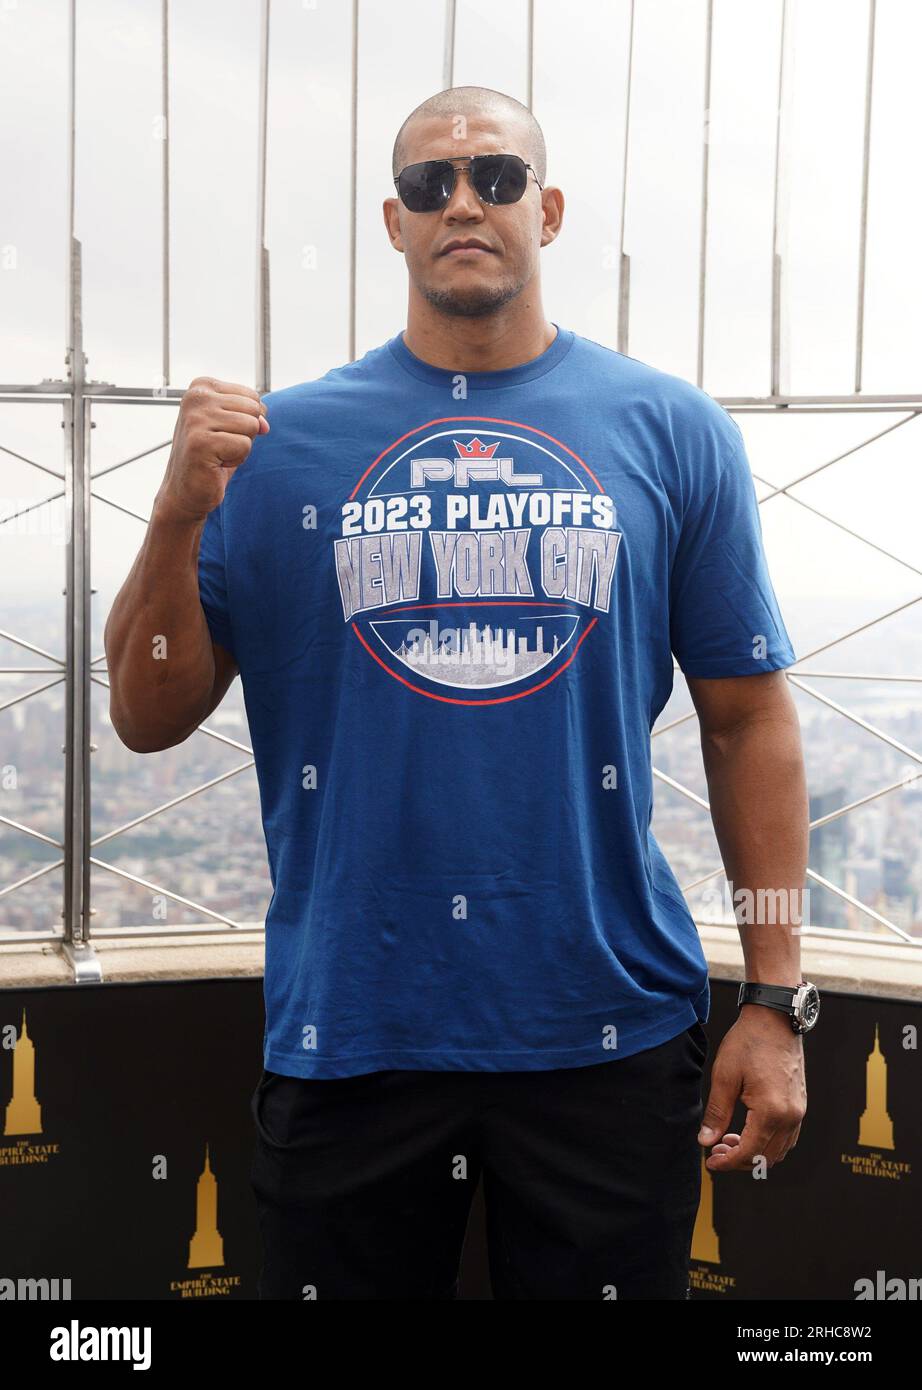 New York, NY, USA. 15th Aug, 2023. Renan Ferreira at a public appearance for PFL World Championship Semifinalists Visit Empire State Building, The Empire State Building, New York, NY August 15, 2023. Credit: Eli Winston/Everett Collection/Alamy Live News Stock Photo